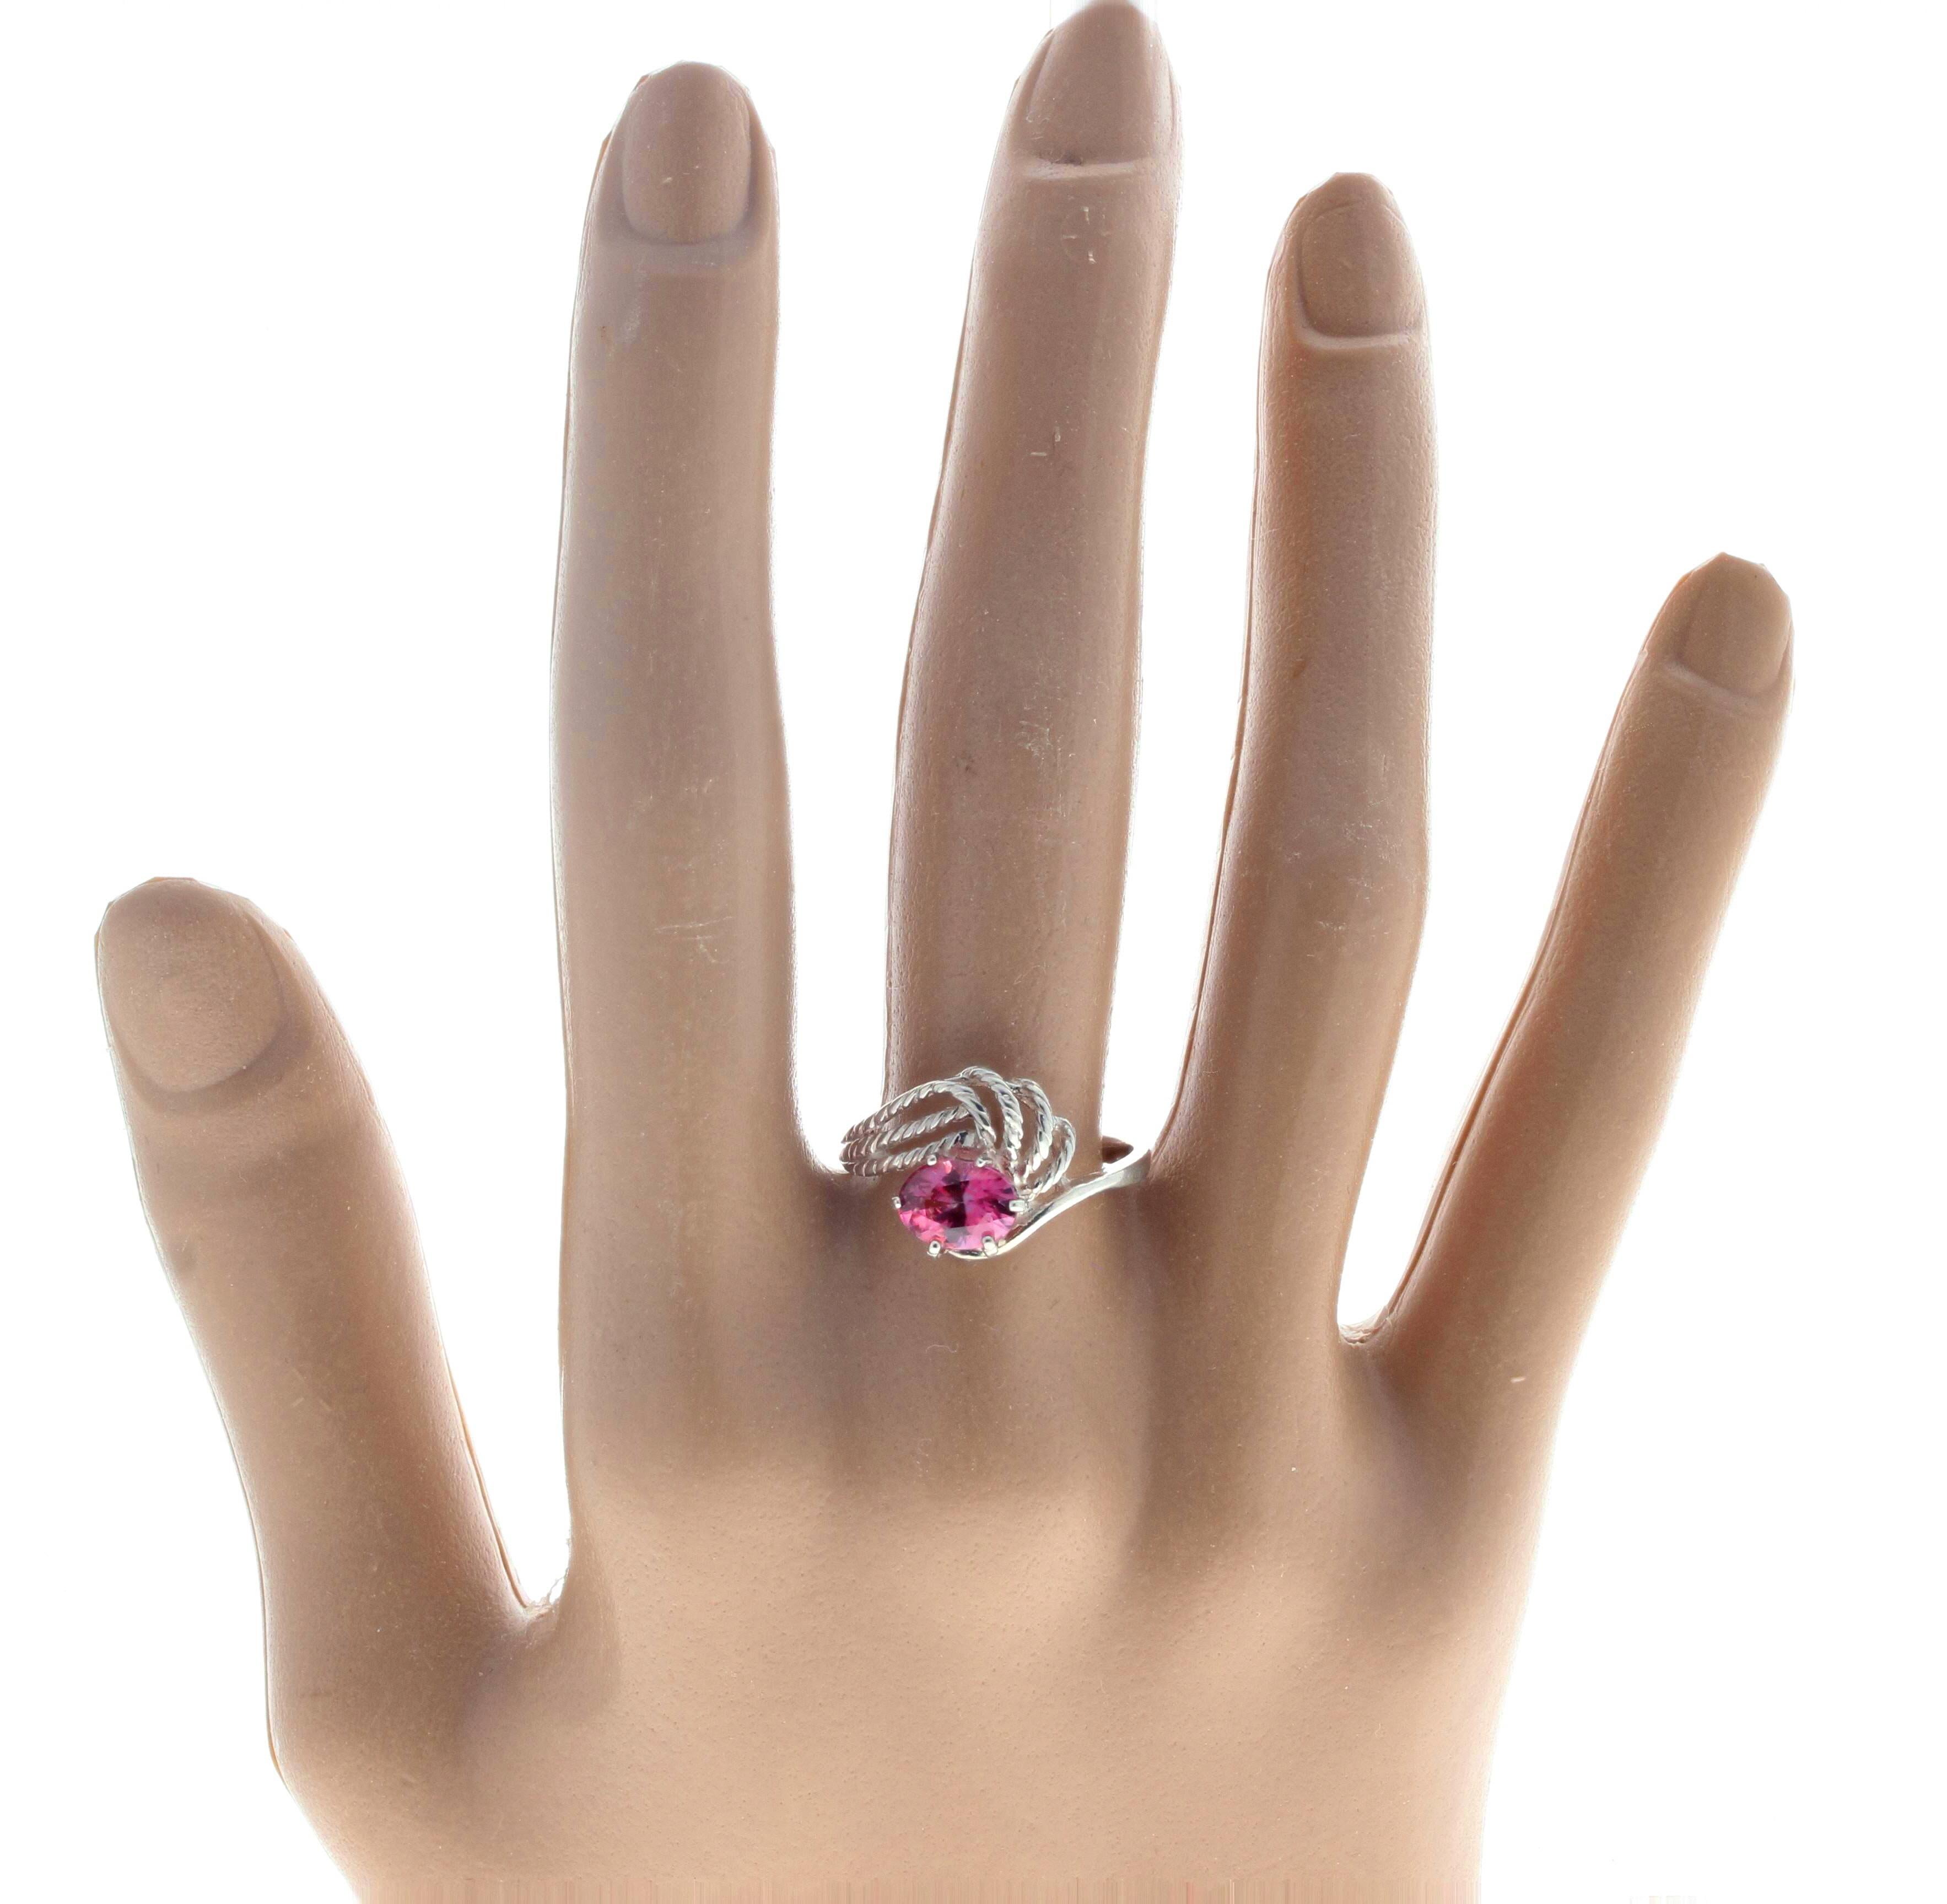 This is a two-tone pink and pinky-red glittering 1.43 Carat Spinel set in our unique handmade artistically designed sterling silver ring sizable 8.25.  